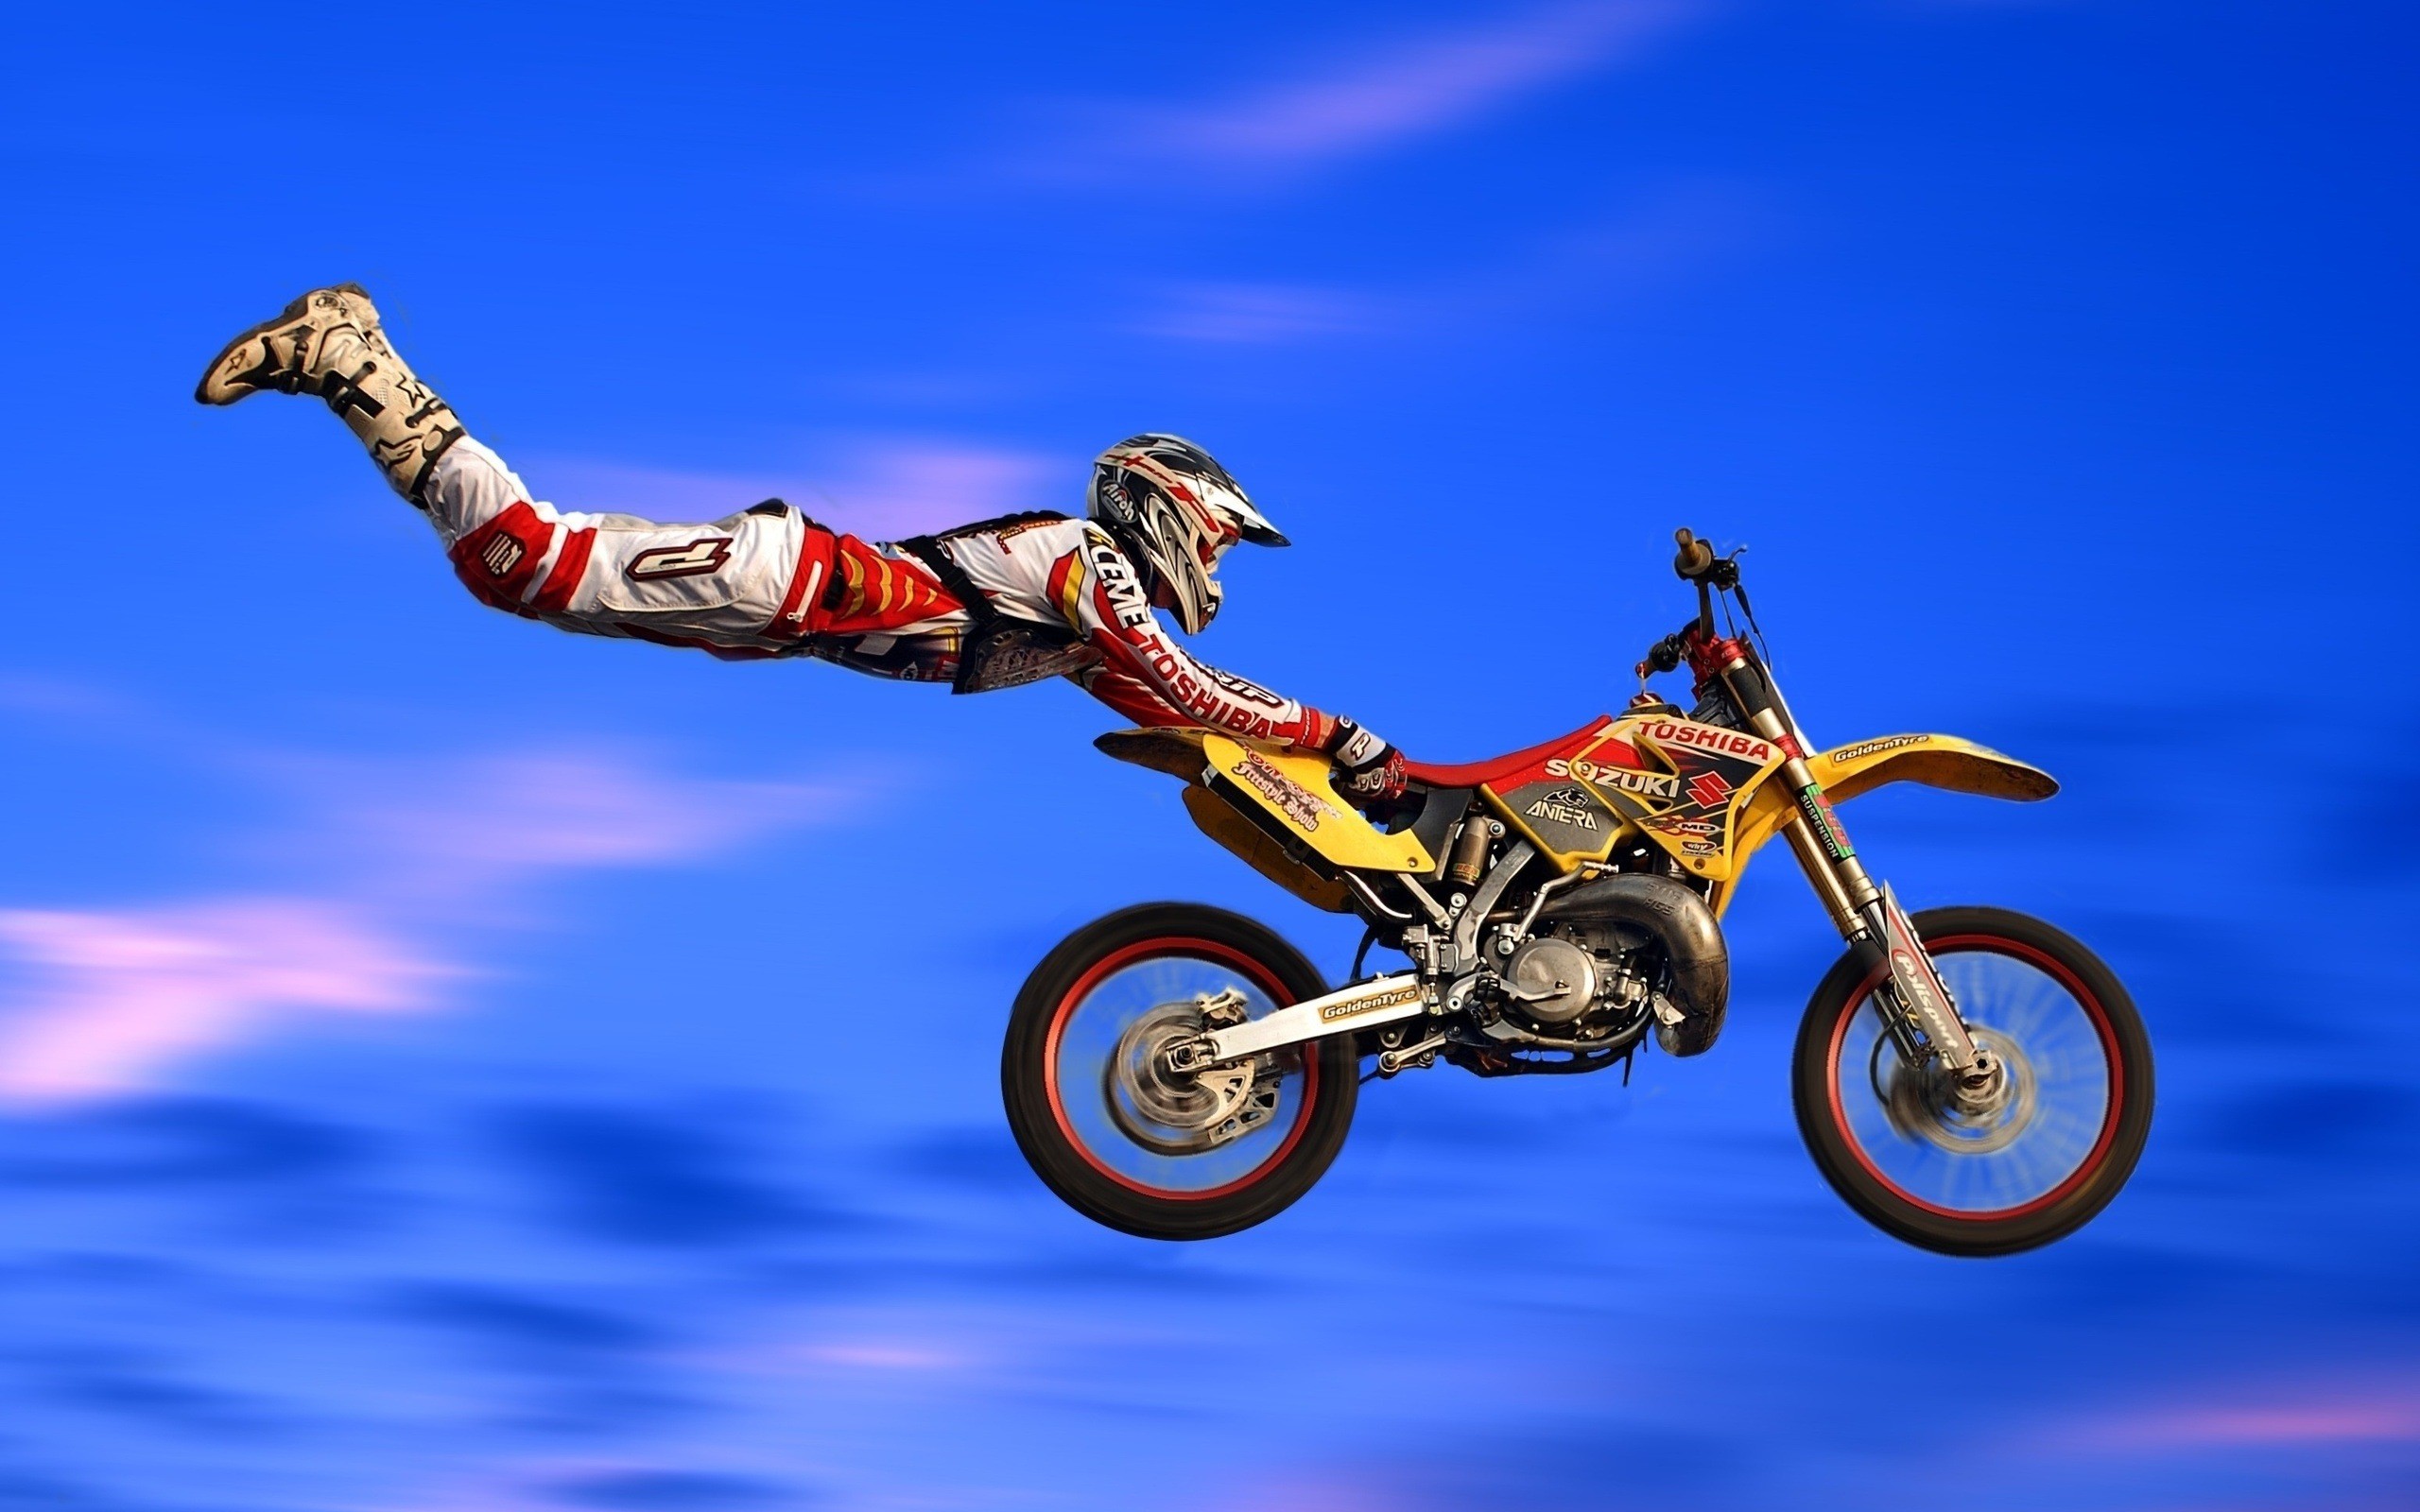 2560x1600 To Download or Set this Free Motocross Wallpaper as the Desktop Background  Image for your Laptop